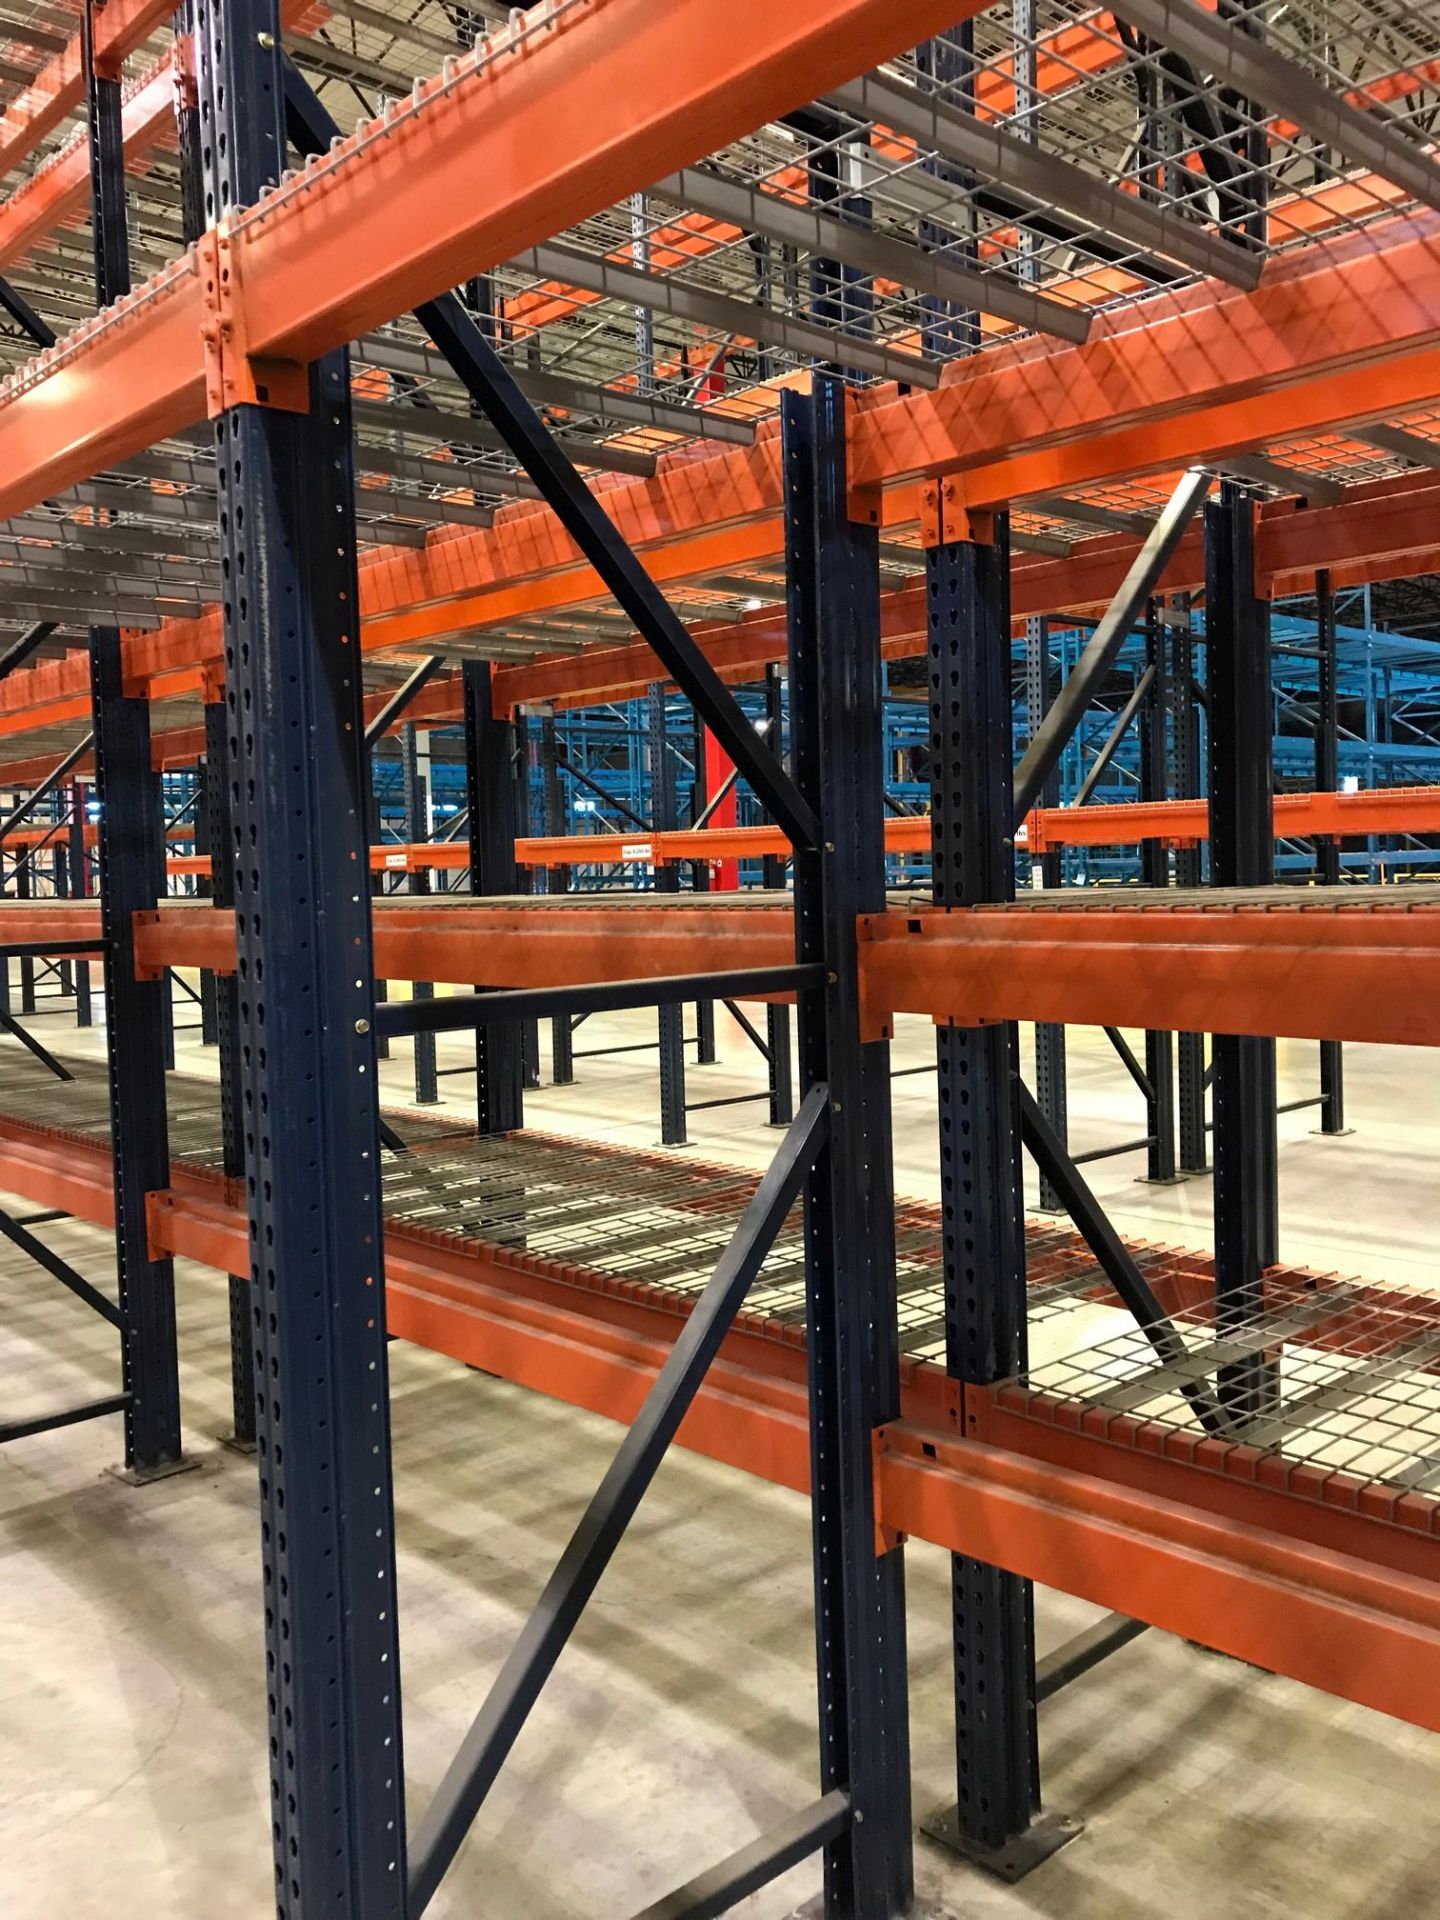 SECTIONS 60" X 108" X 288" TEARDROP TYPE ADJUSTABLE BEAM PALLET RACK WITH WIRE DECKING, 6" HIGH - Image 5 of 14